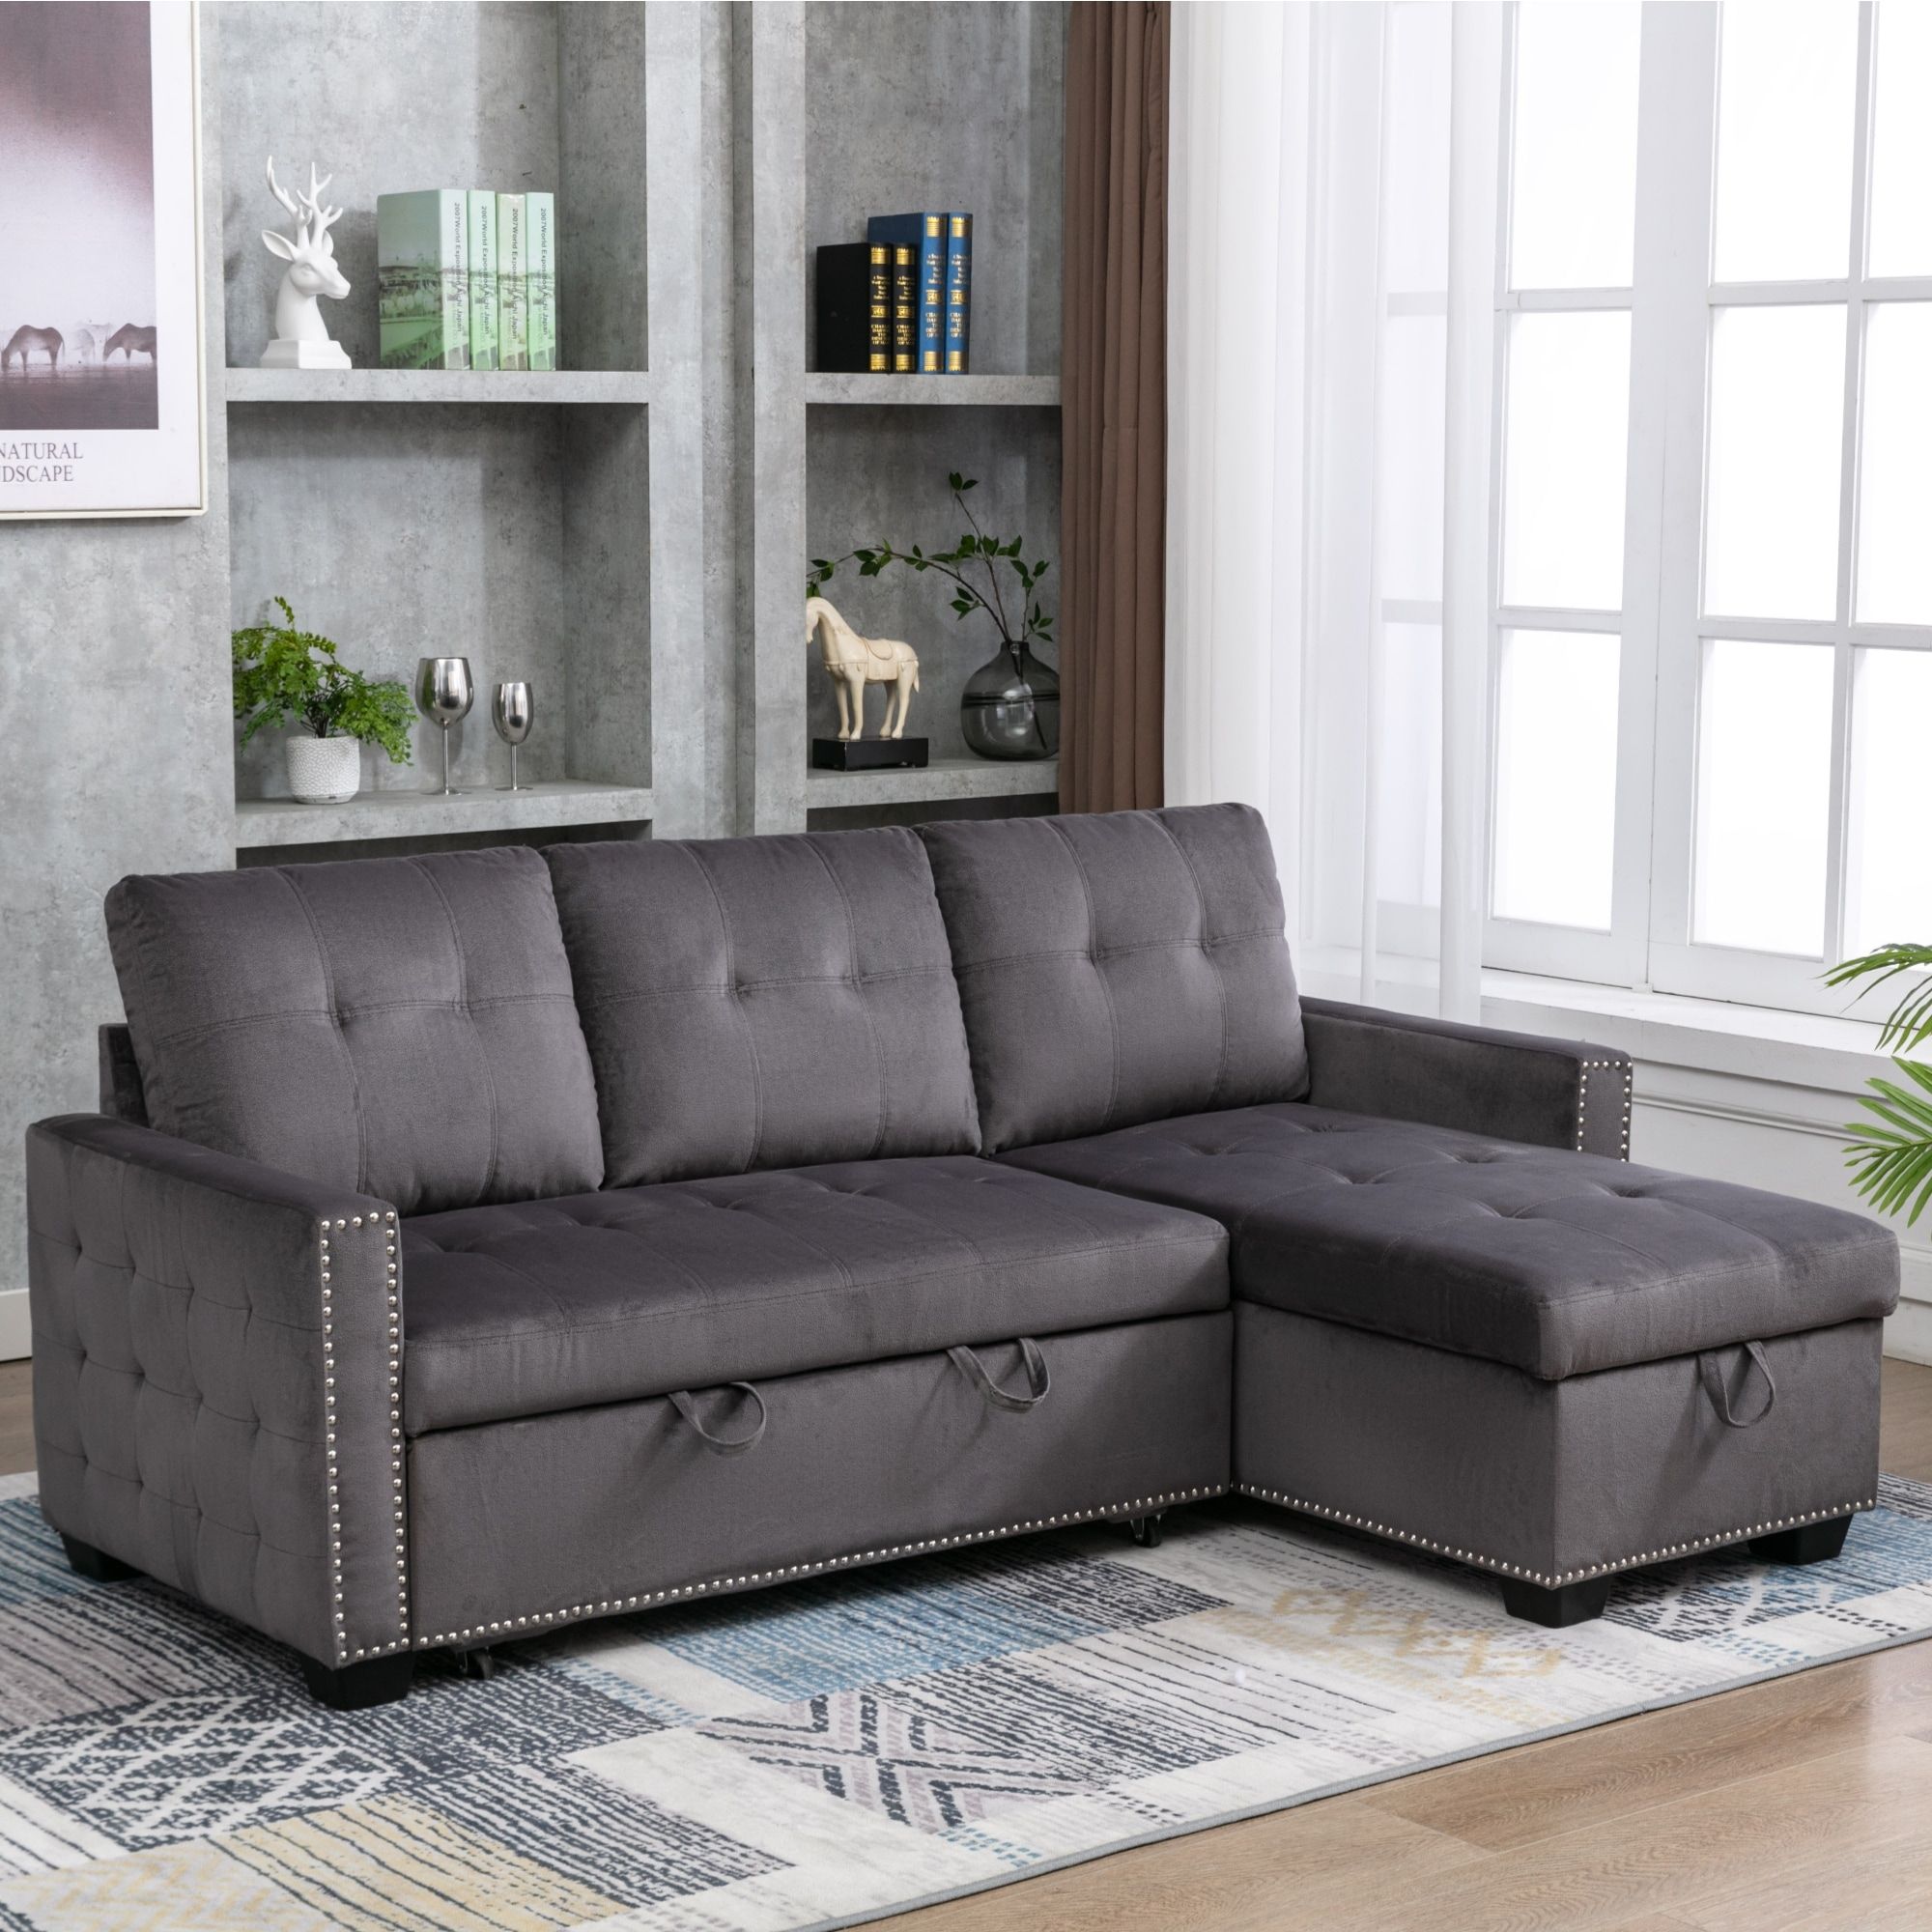 Reversible Velvet Sectional Sofa Pull Out Sleeper Sofa Bed L Shape 3 Seat  Sectional Storage Chaise With Removable Cushions – On Sale – – 36958384 Pertaining To Chaise 3 Seat L Shaped Sleeper Sofas (View 2 of 15)